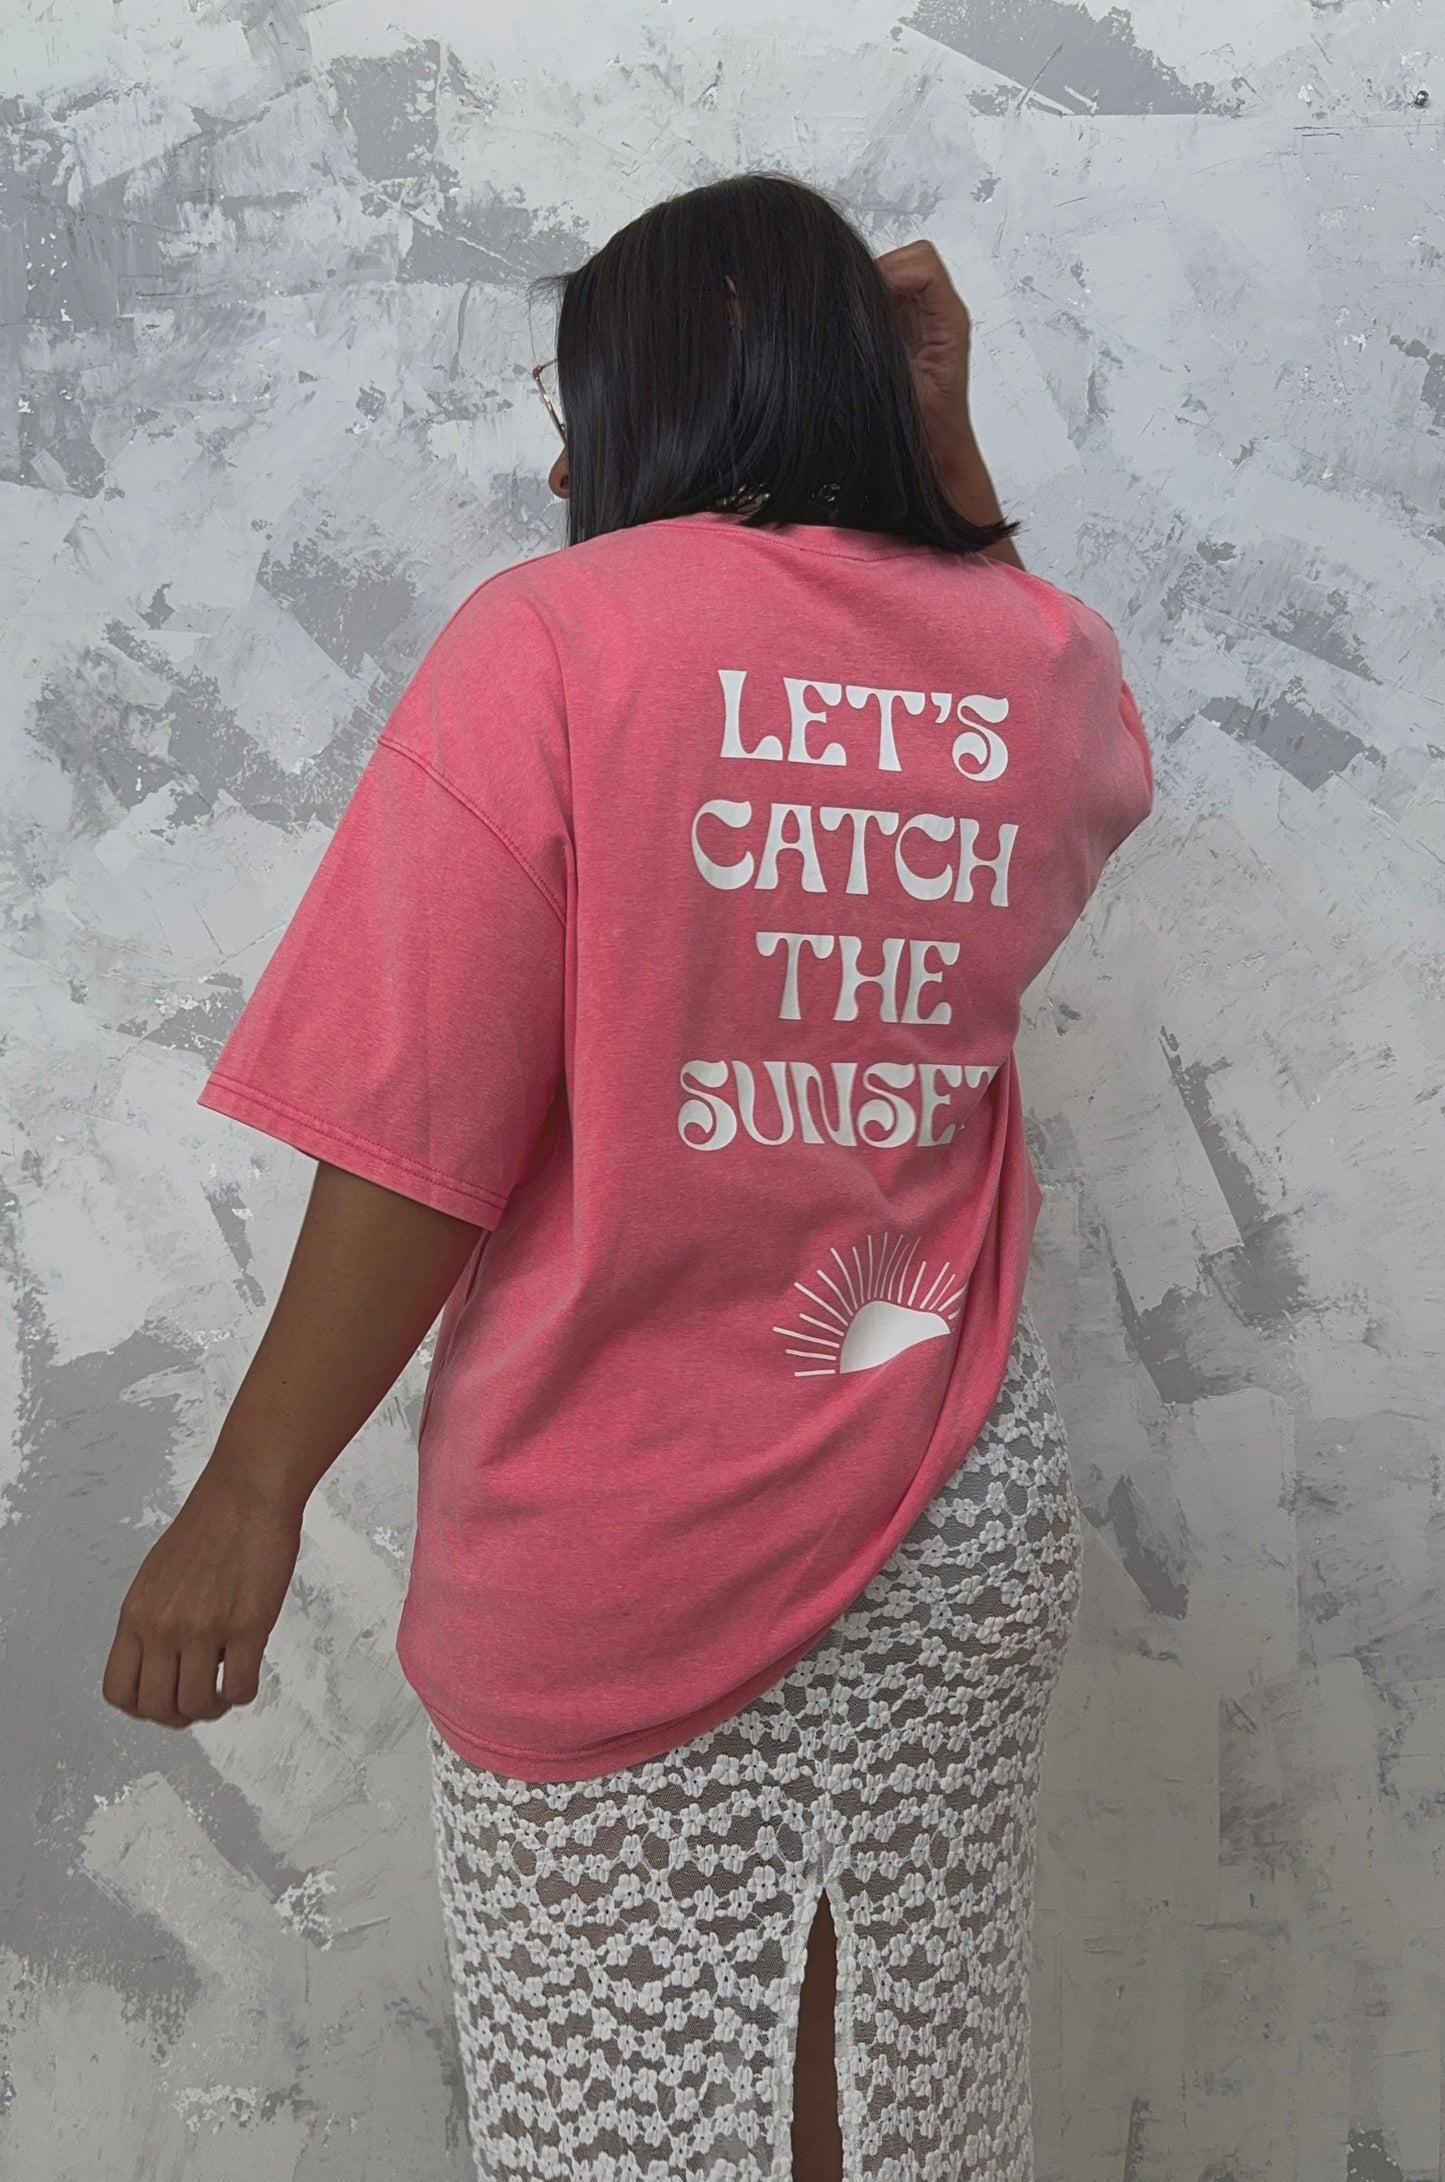 Let's Catch The Sunset TShirt